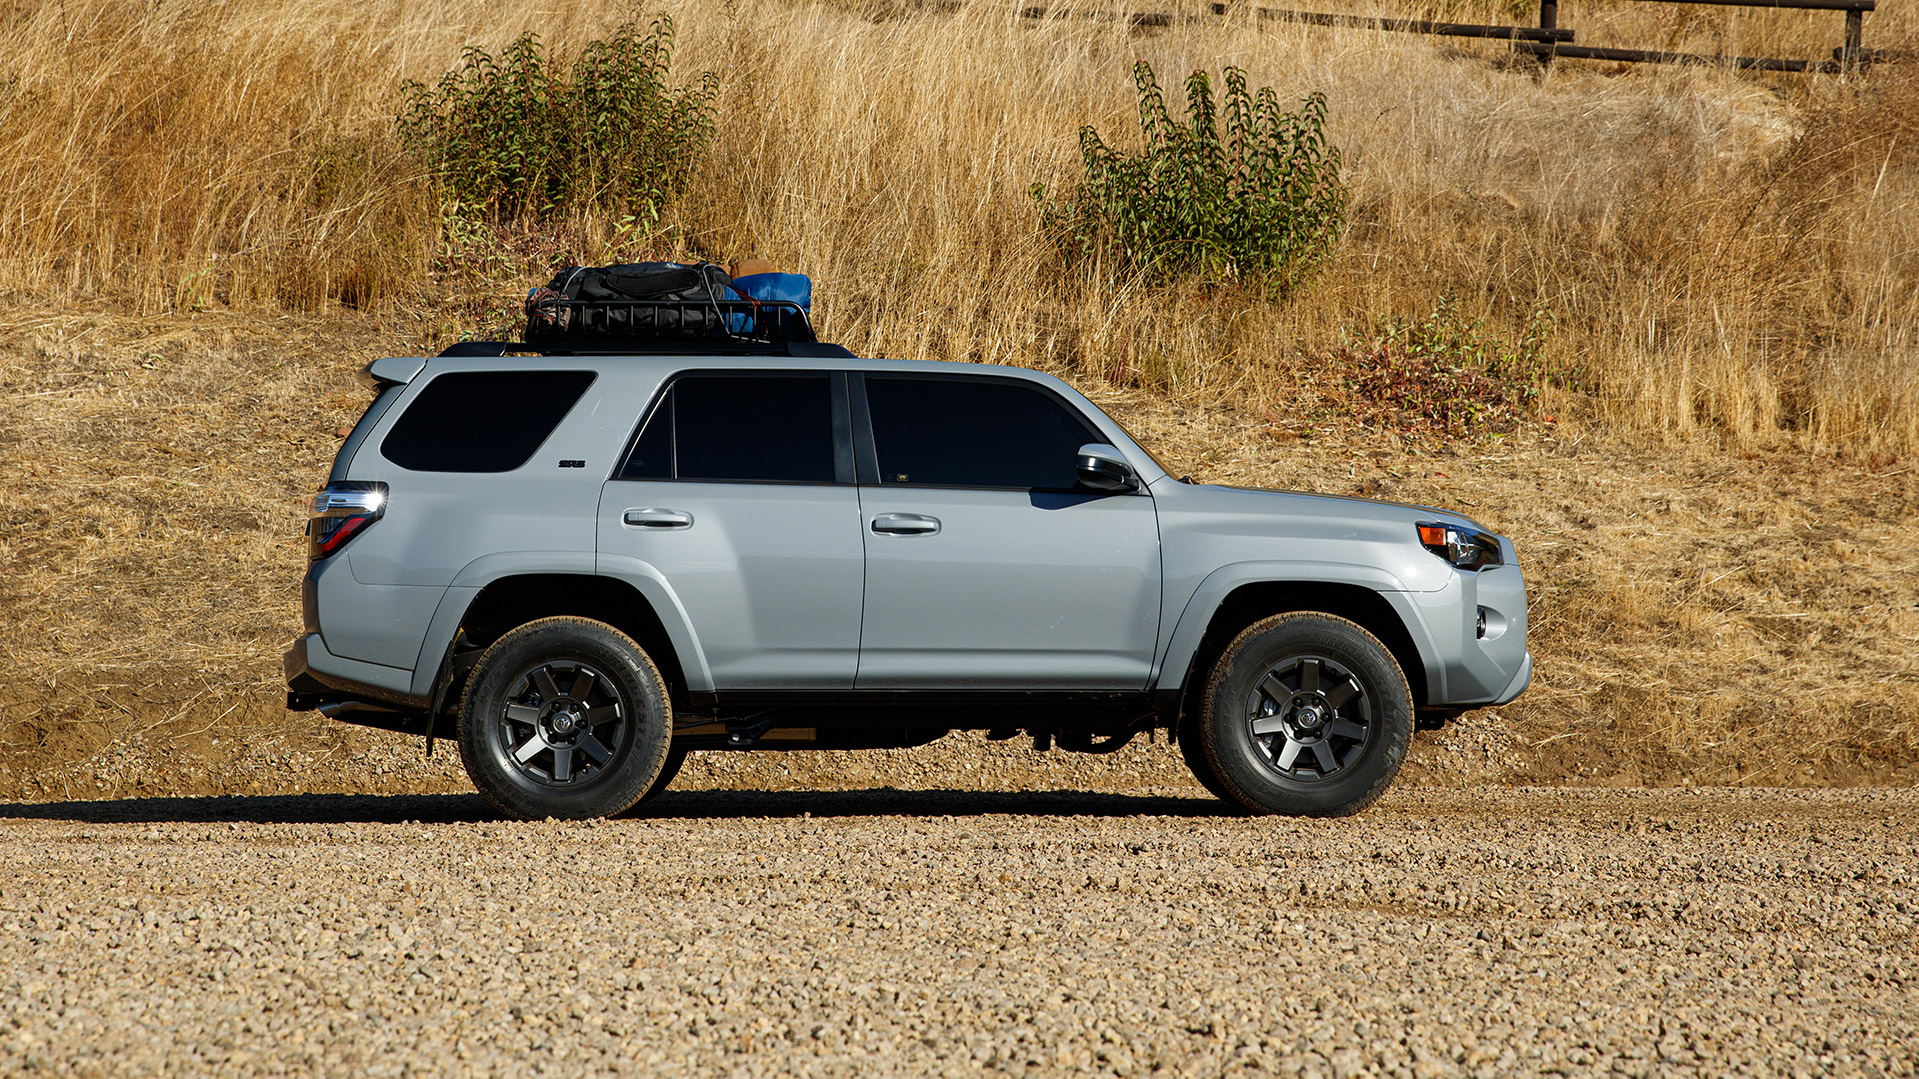 What We Know About And Expect From The Next Generation Toyota 4runner